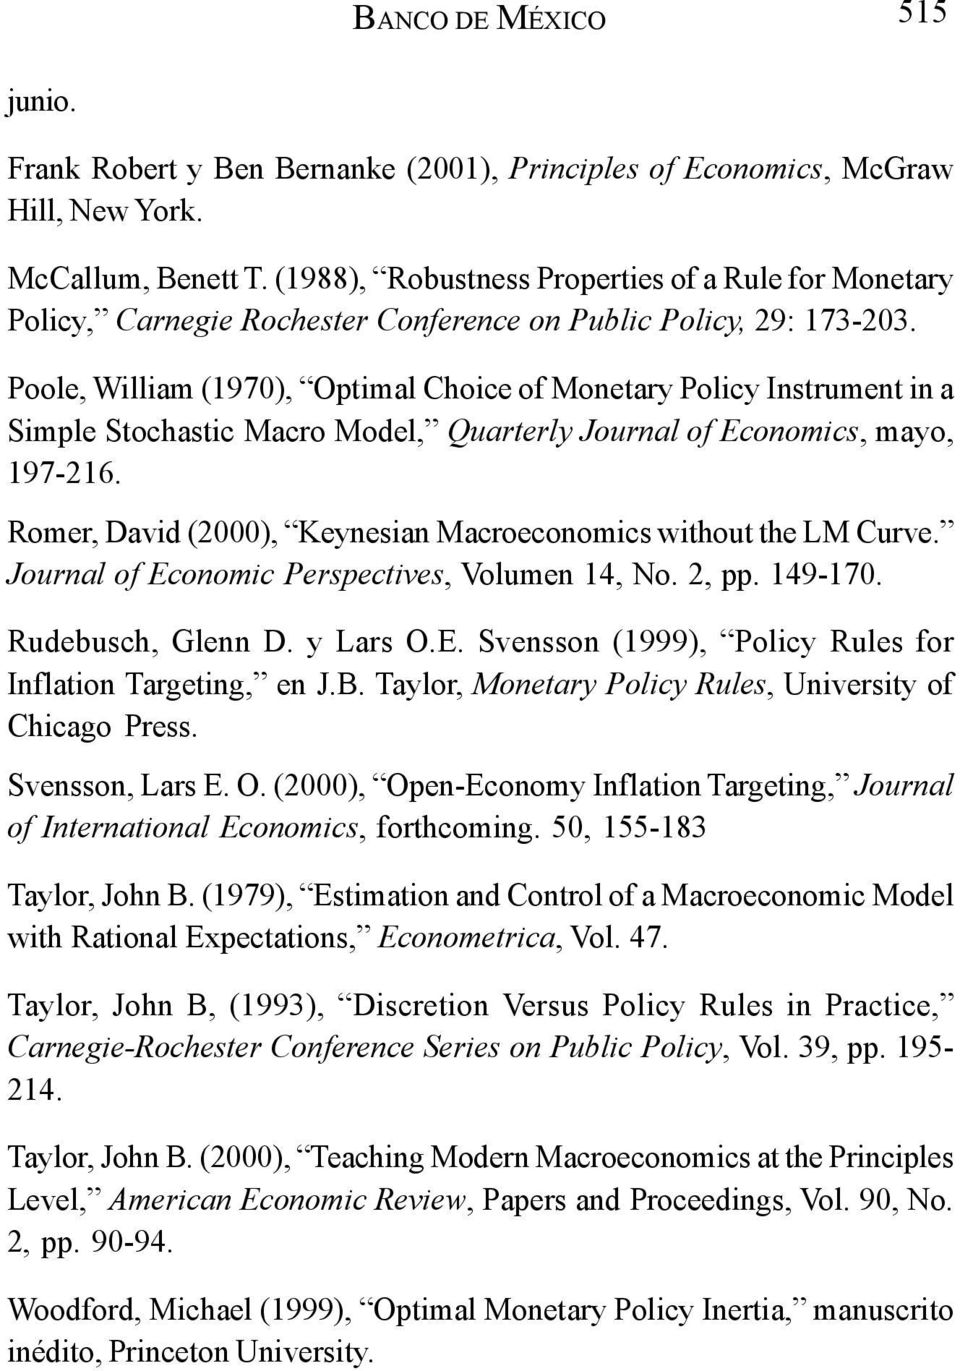 Poole, William (1970), Optimal Choice of Monetary Policy Instrument in a Simple Stochastic Macro Model, Quarterly Journal of Economics, mayo, 197-216.